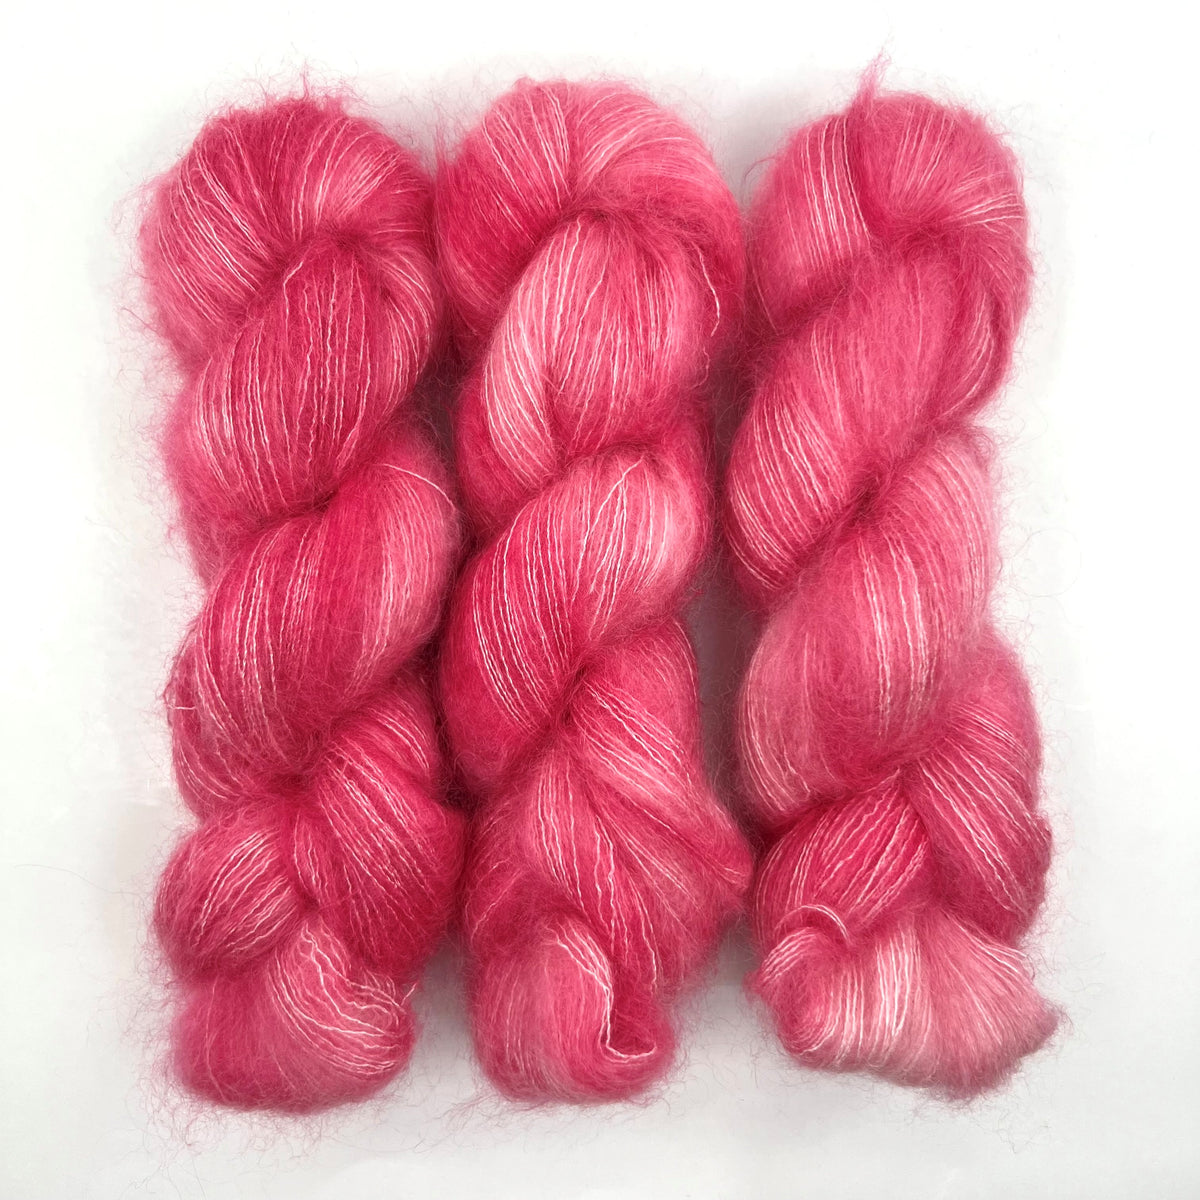 Cherry Blossom - Delicacy Lace - Dyed Stock